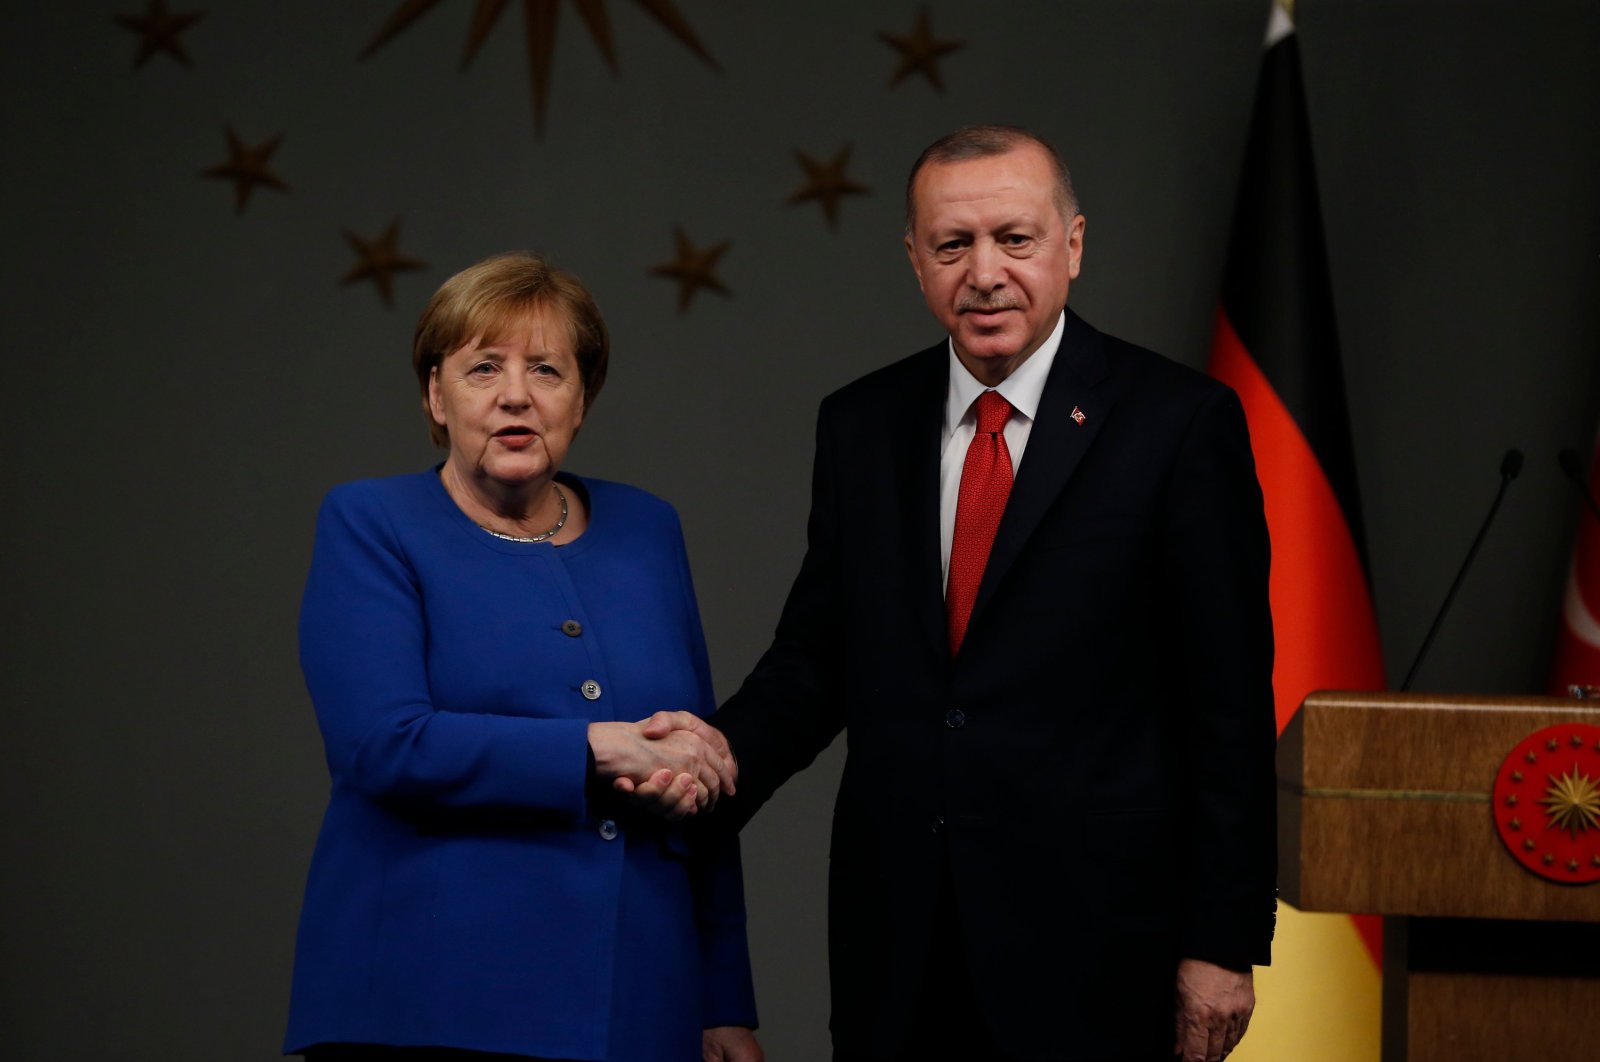 Germany's Chancellor Angela Merkel, left, shakes hands with President Recep Tayyip Erdoğan, right, following their joint news conference after their meeting in Istanbul, Jan. 24, 2020. (AP)